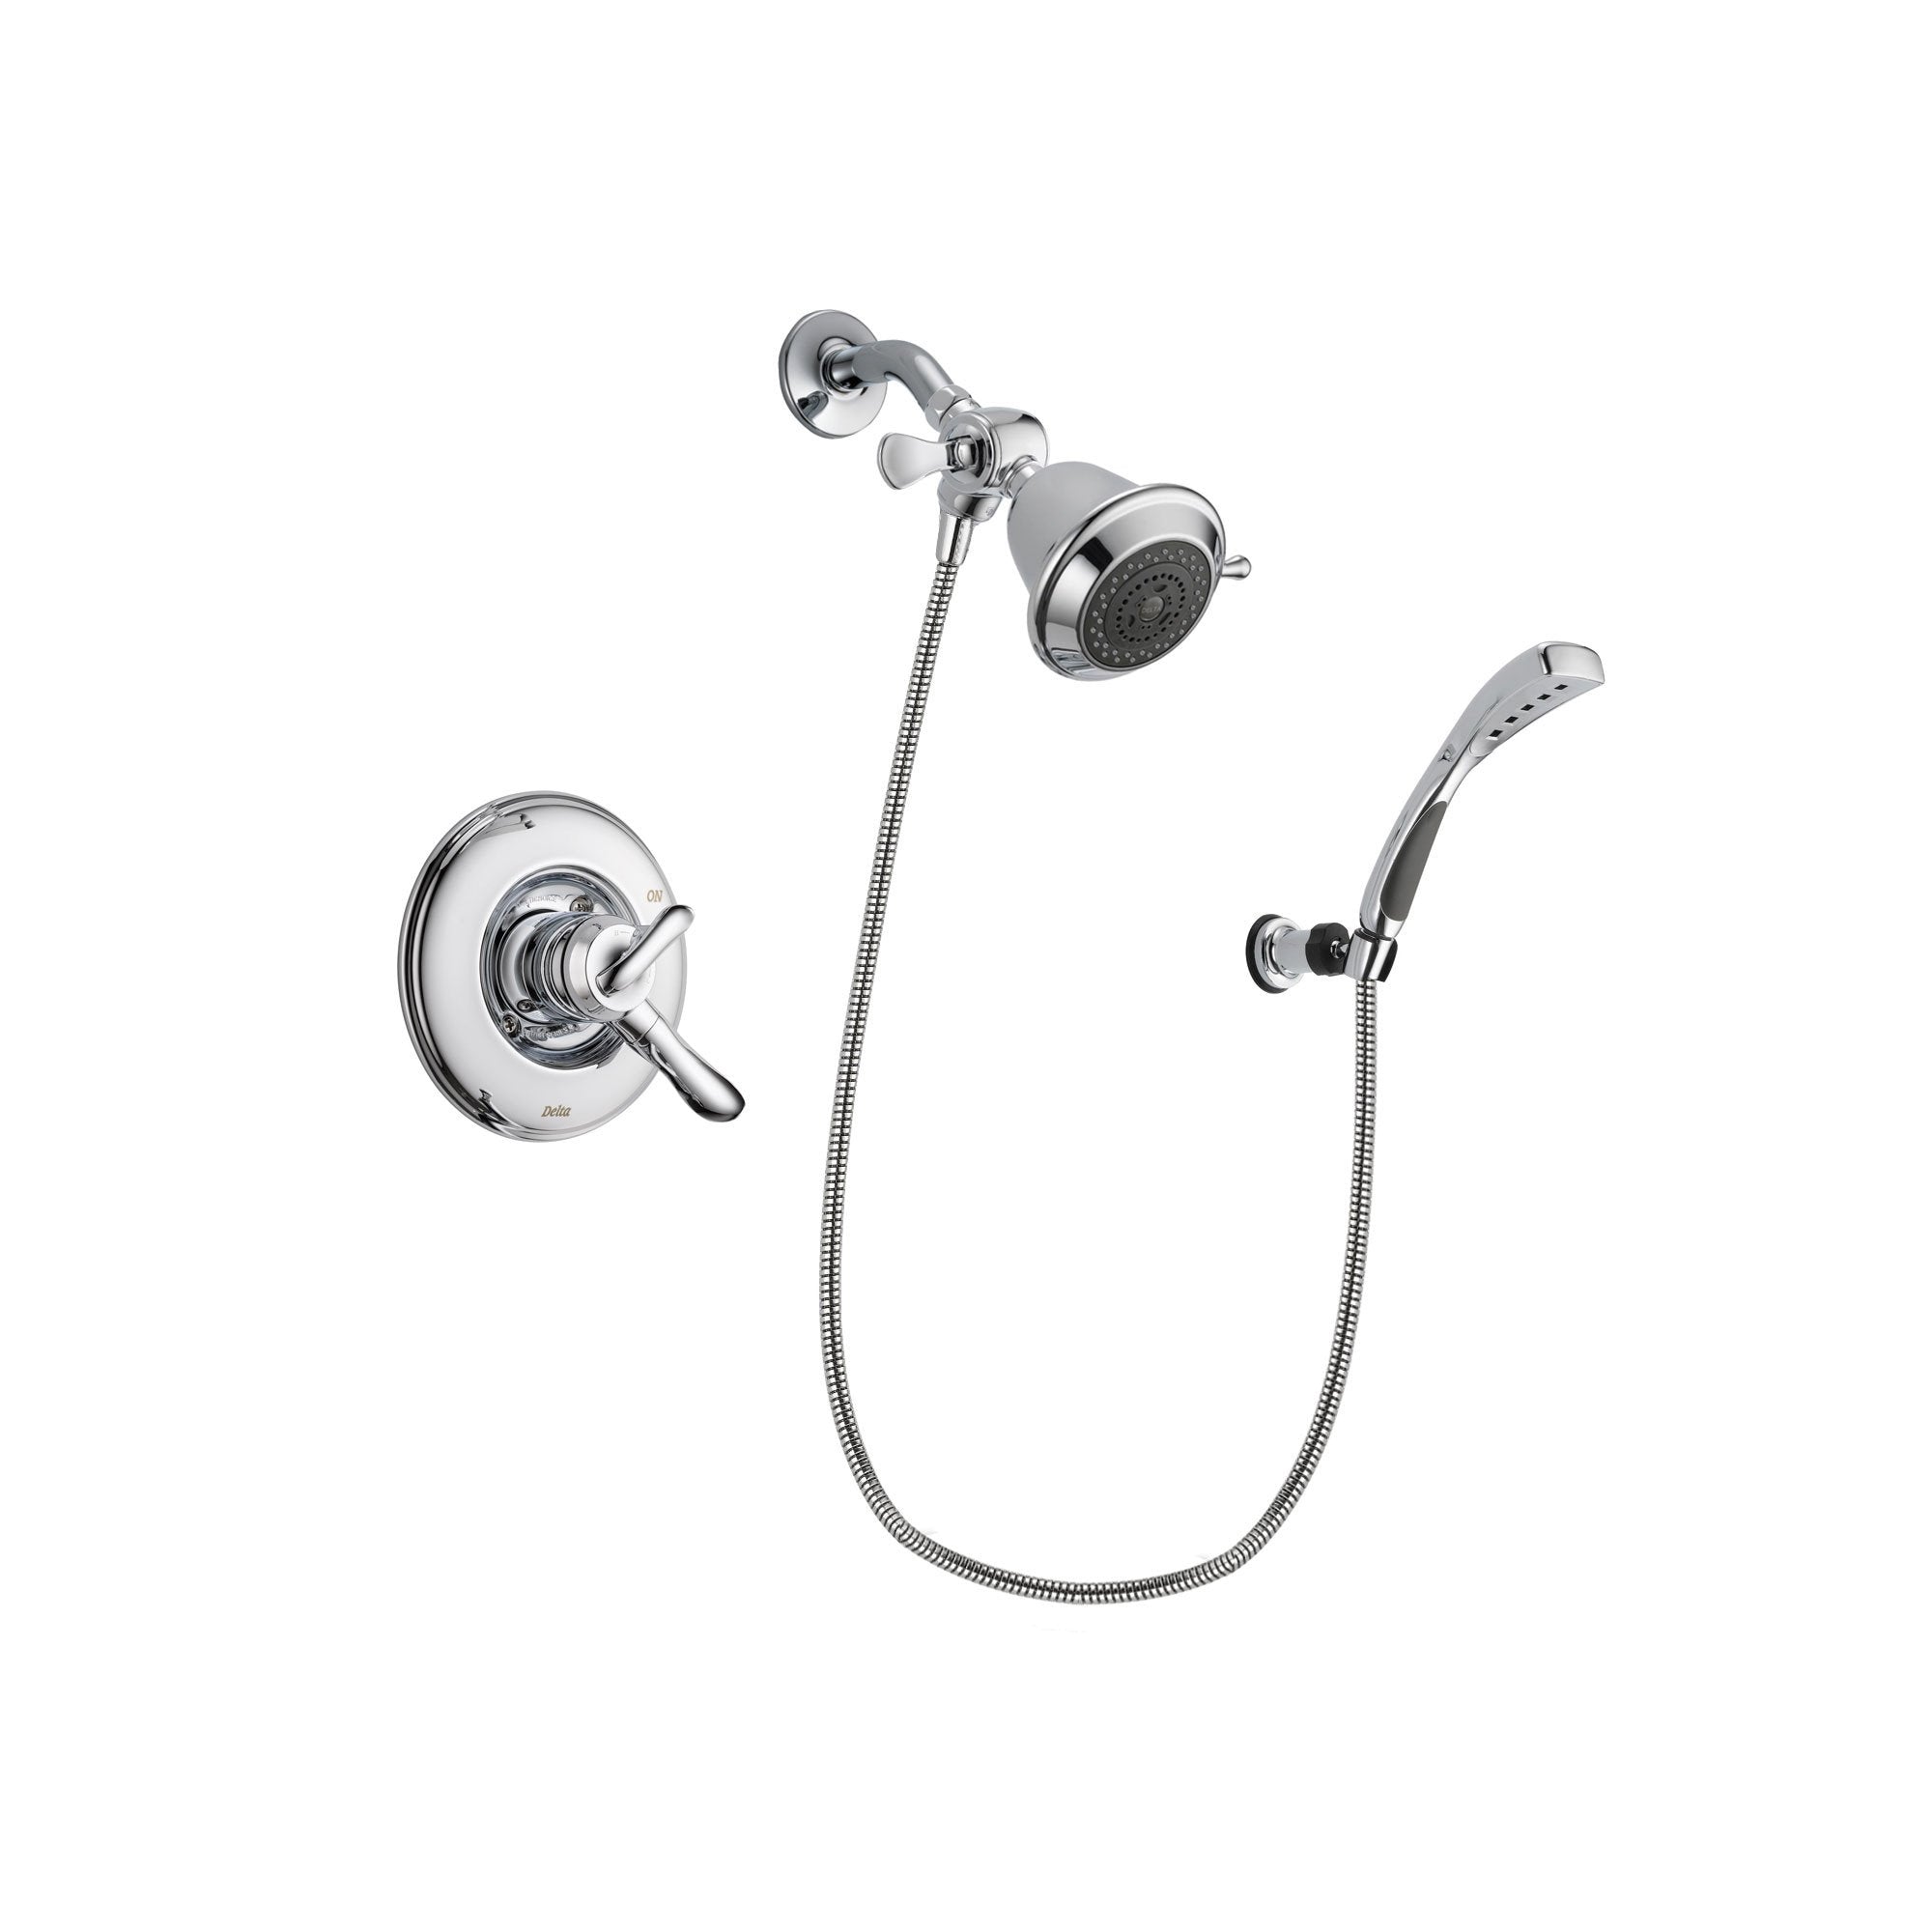 Delta Linden Chrome Finish Dual Control Shower Faucet System Package with Shower Head and Wall-Mount Bracket with Handheld Shower Spray Includes Rough-in Valve DSP1000V